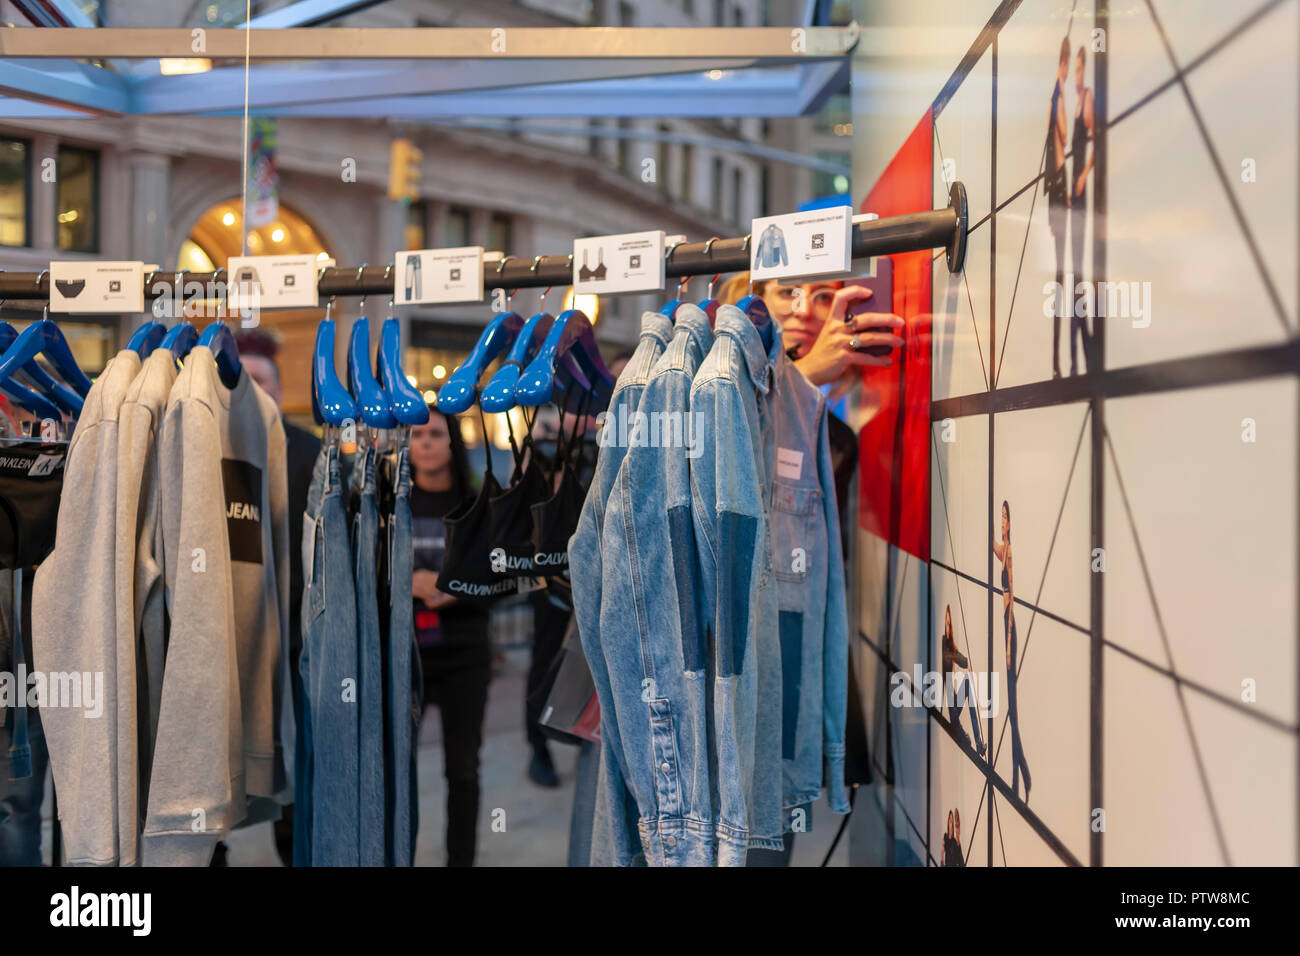 Retailer Calvin Klein High Resolution Stock Photography and Images - Alamy